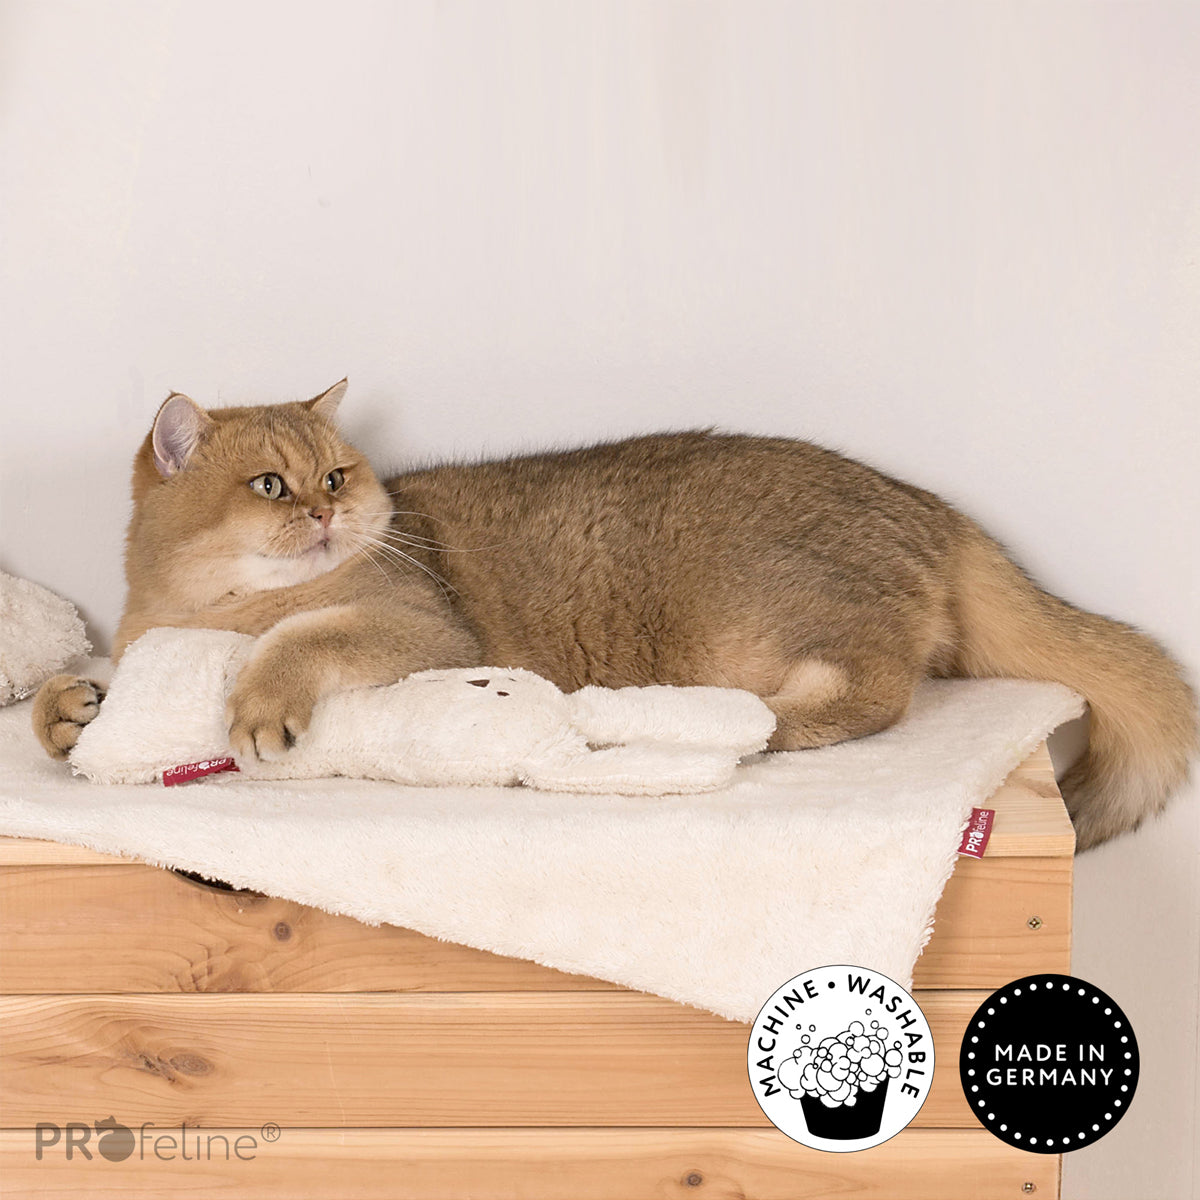 Profeline Snuggle Bunny Cat Toy, For Cuddling & Kicking | at Made Moggie